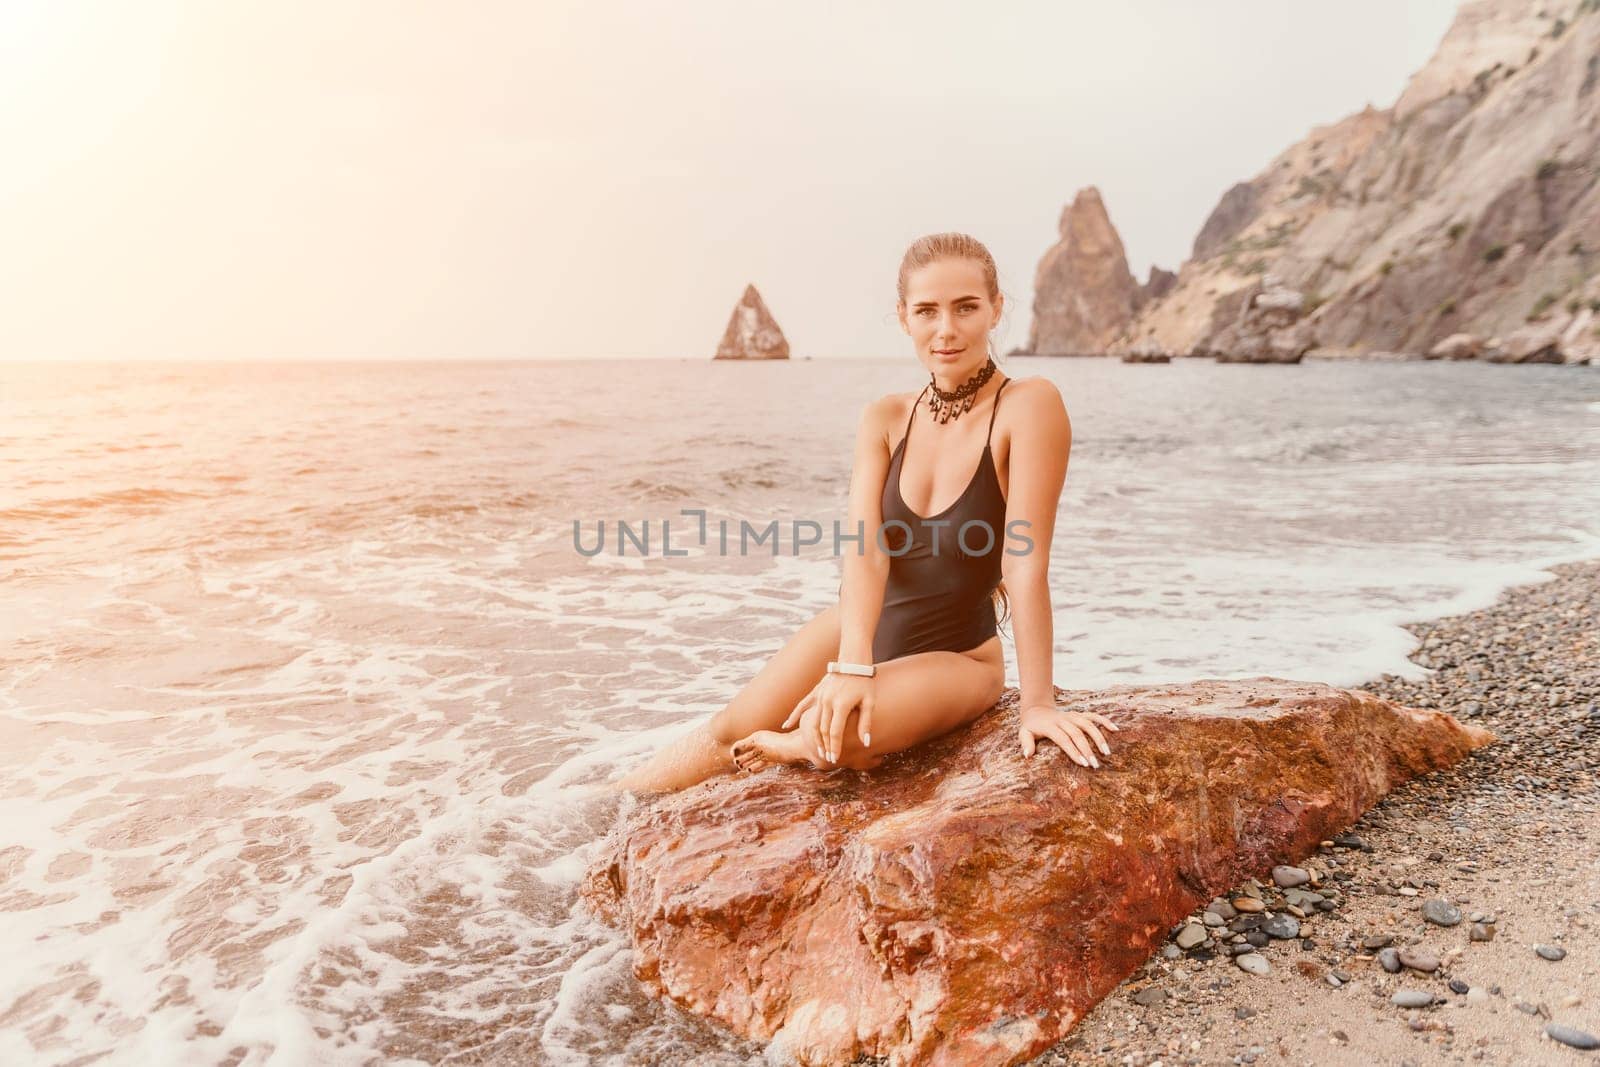 Woman travel portrait. Happy woman with long hair looking at camera and smiling. Close up portrait cute woman in black bikini posing on a red volcanic rock on the sea beach by panophotograph